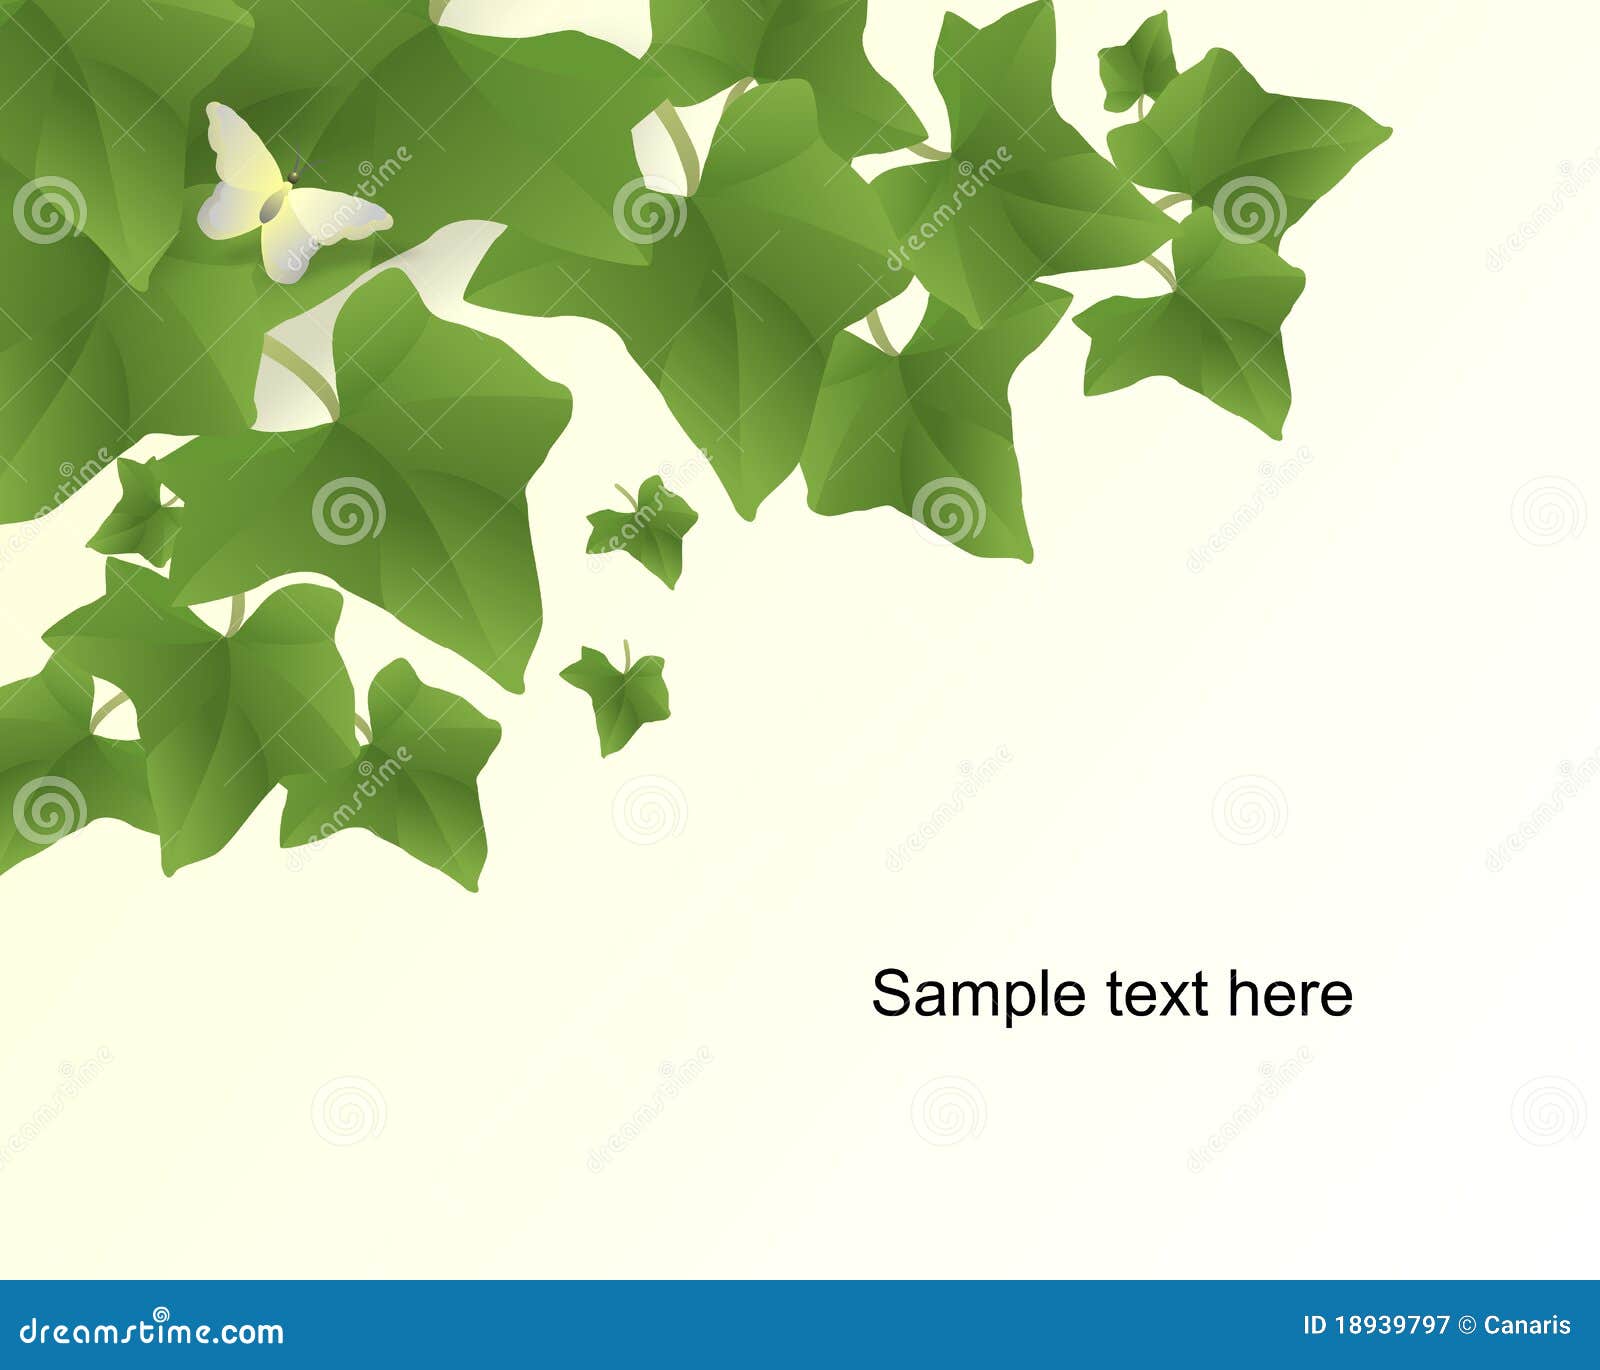 leaf clipart cdr - photo #34